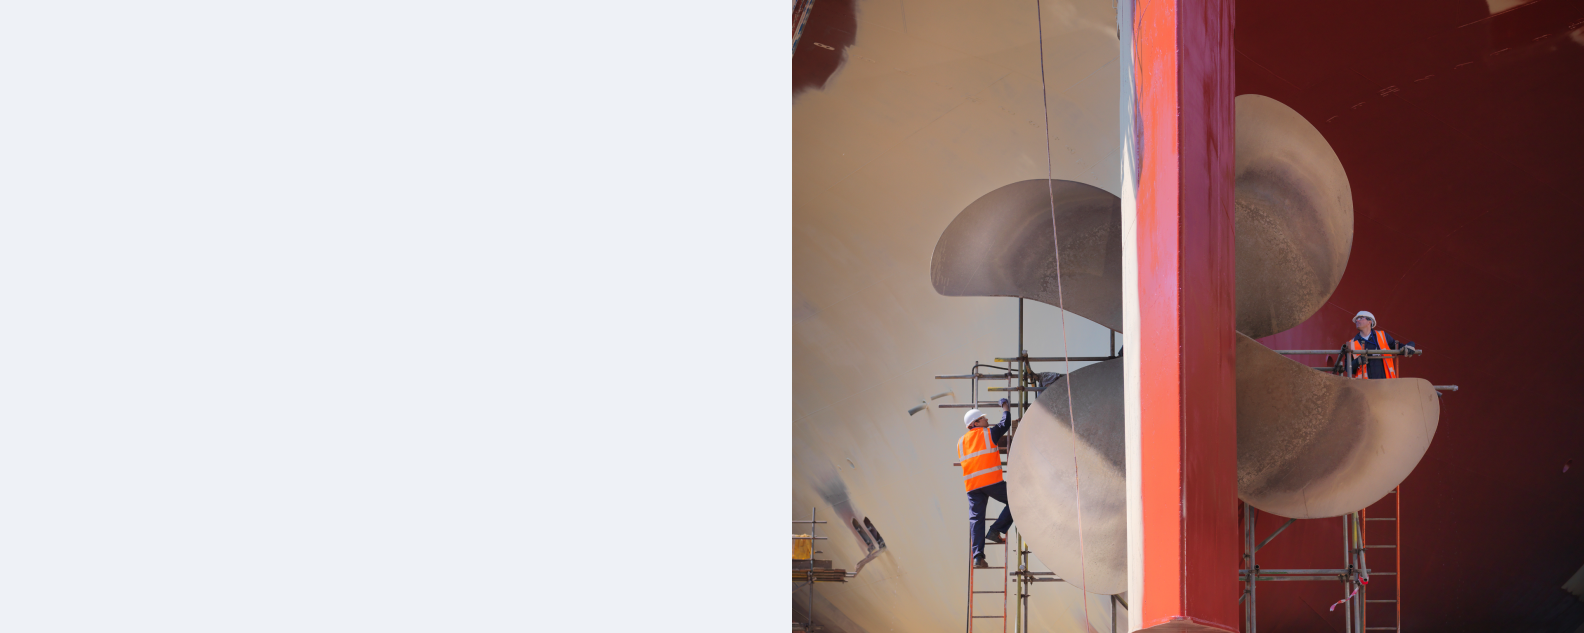 Worker on scaffolding next to ship’s propeller